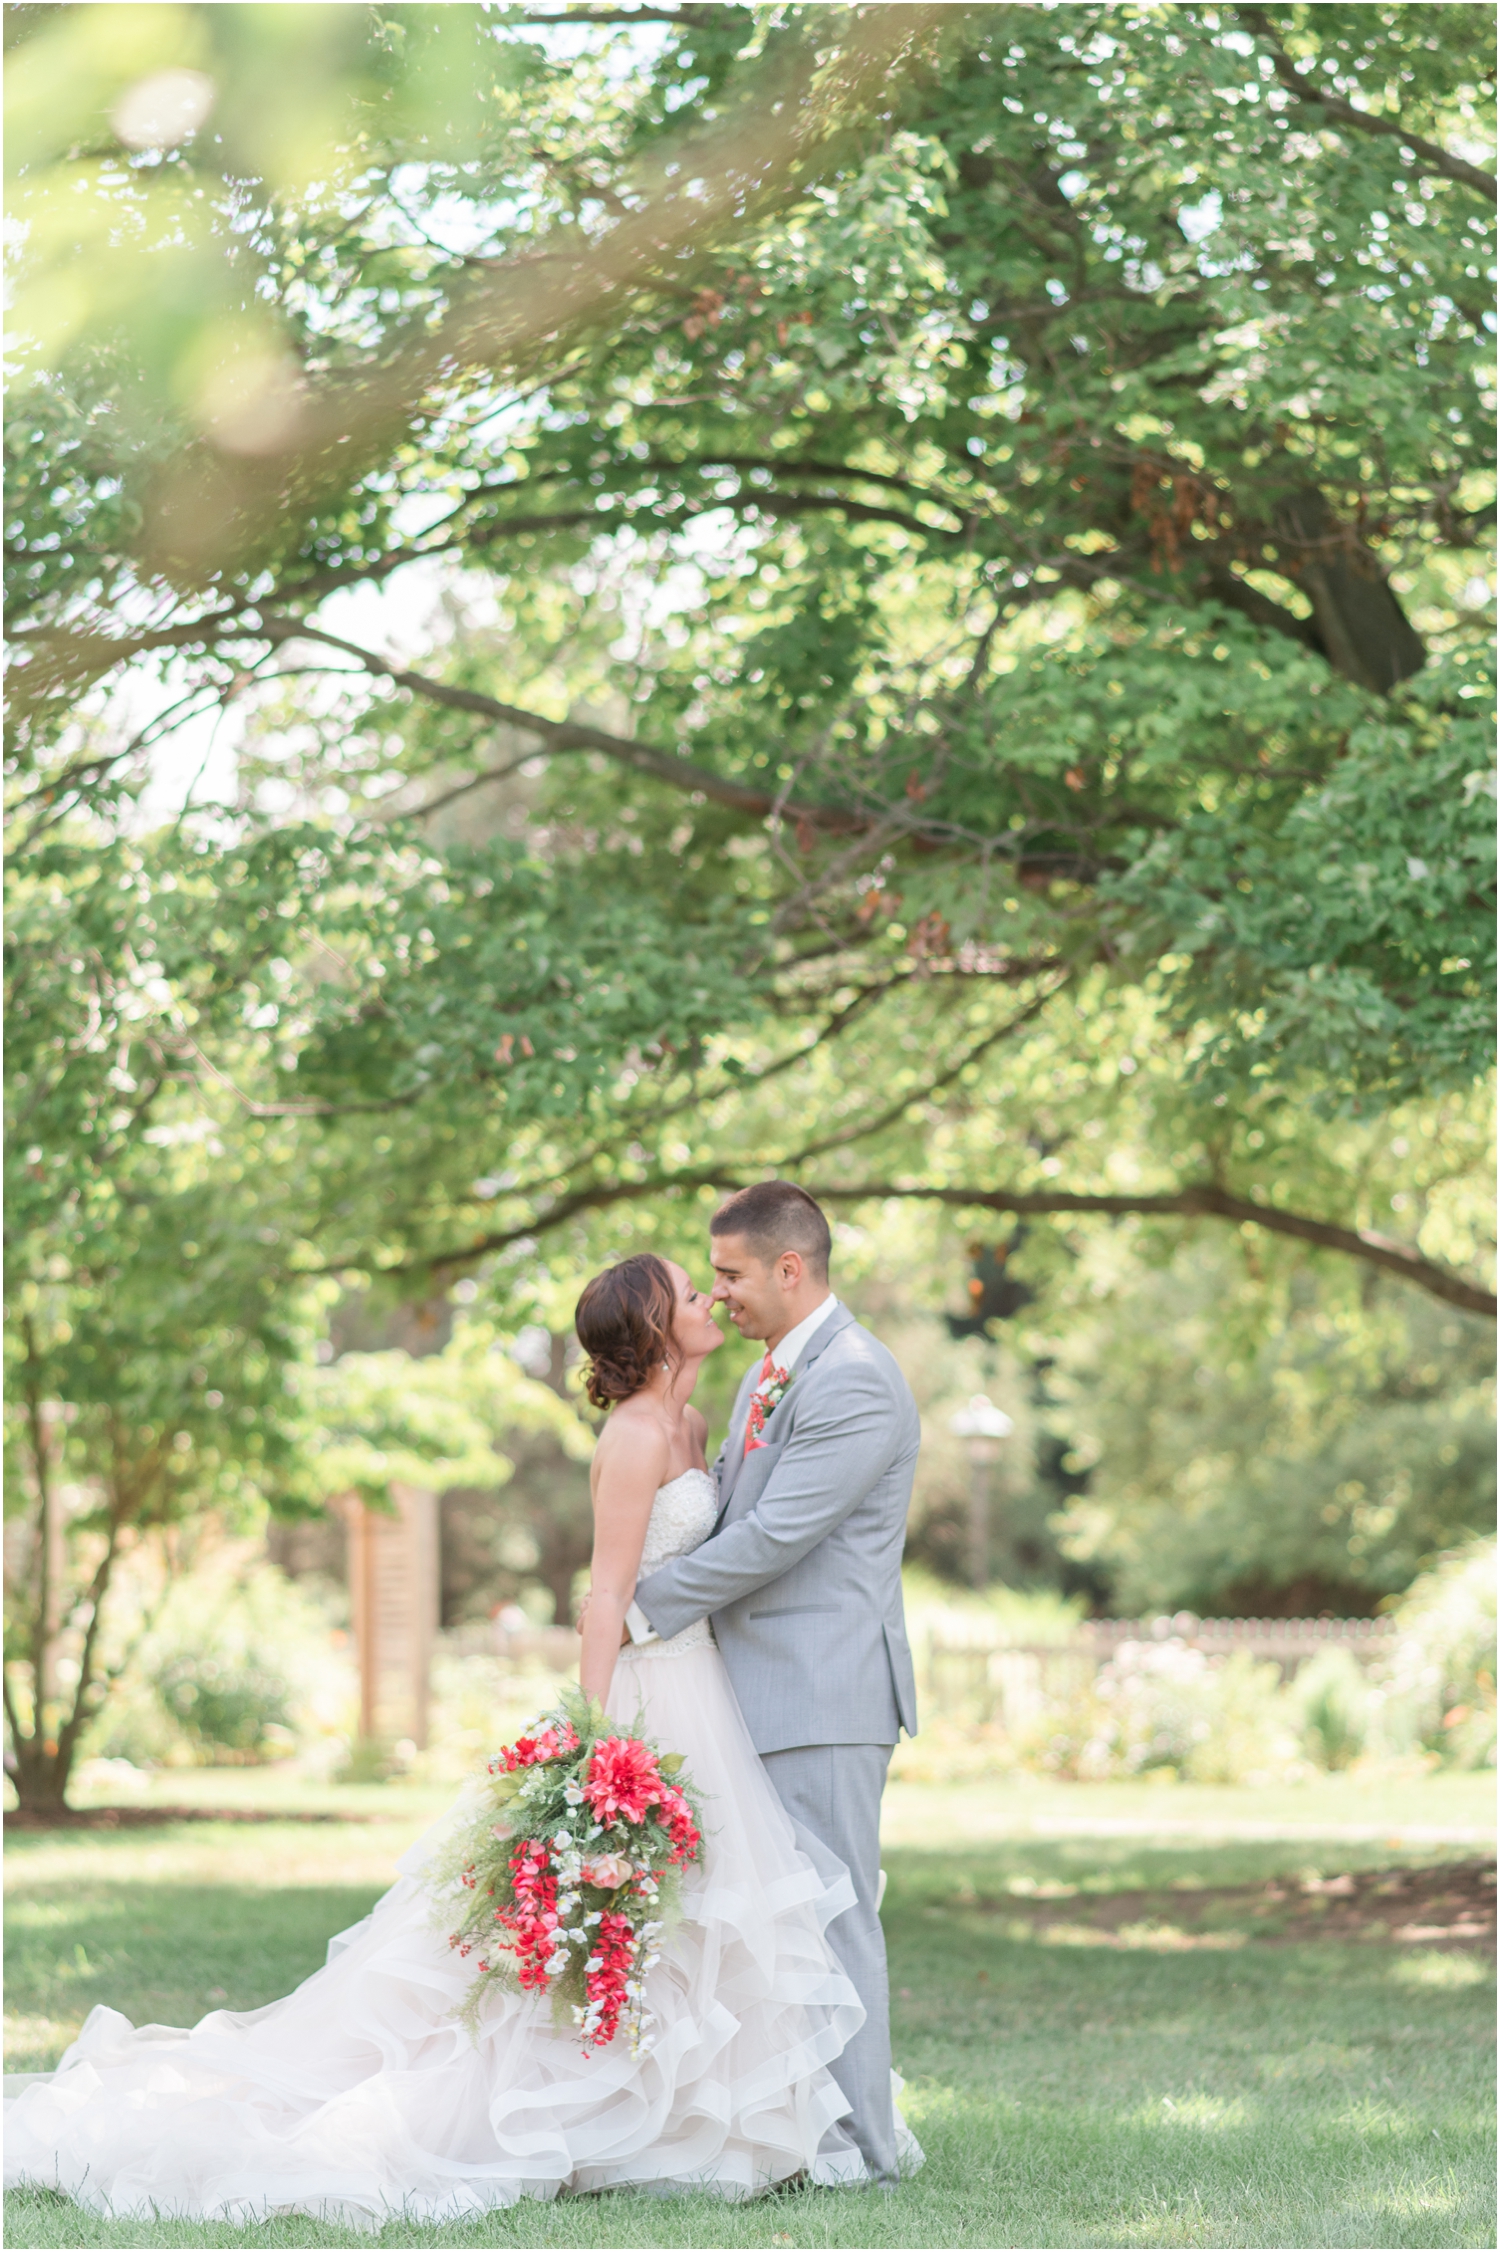 Bride and Groom Portraits Blush wedding gown Wedding Photography Grey and Coral Pink Wedding Intimate Foster Park Indiana Wedding Photographer Rose Courts Photography